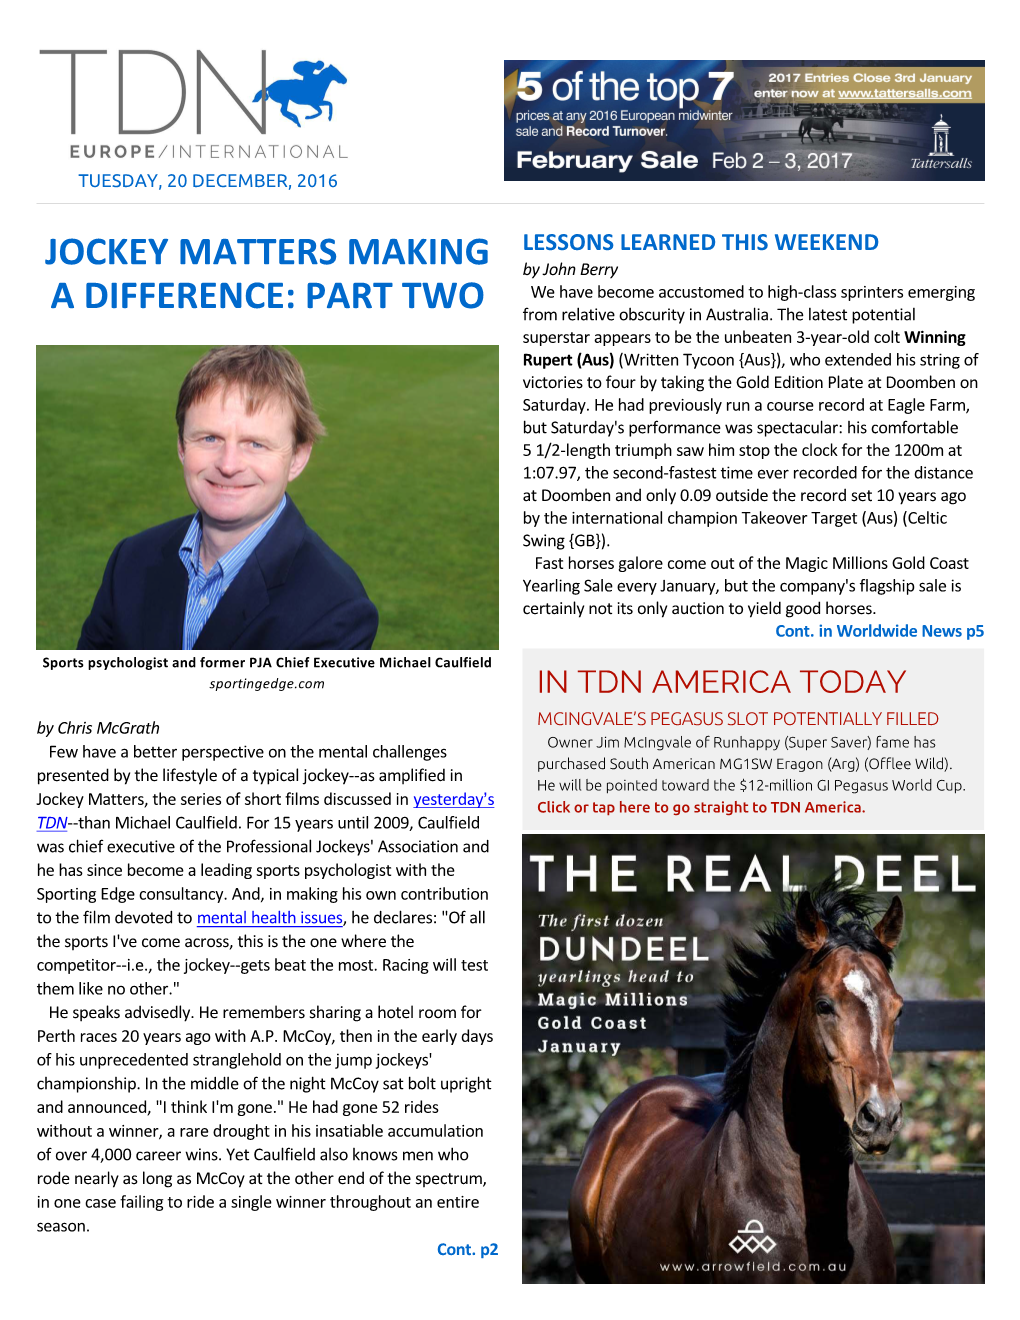 Jockey Matters Making a Difference: Part Two Cont